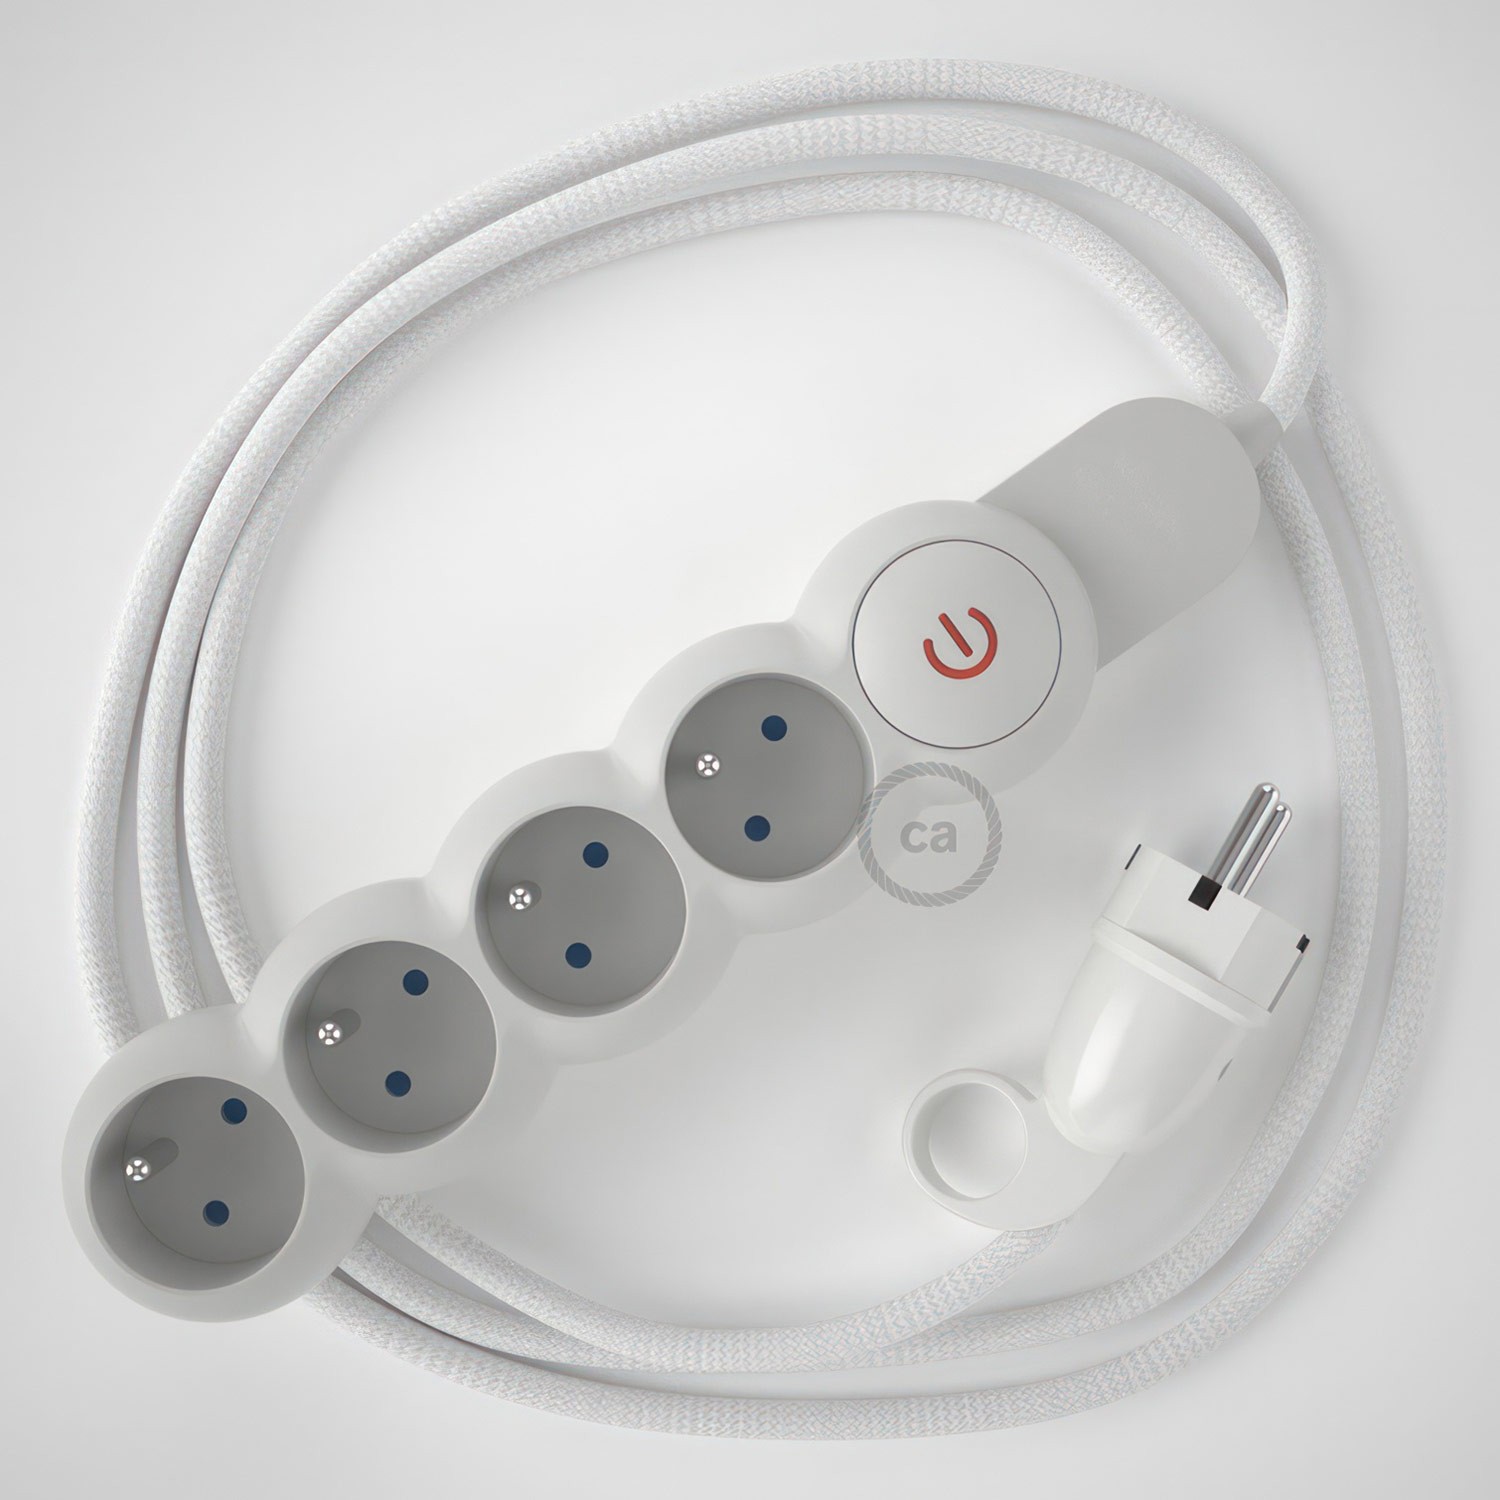 French Power Strip with electrical cable covered in rayon White fabric RM01 and Schuko plug with confort ring